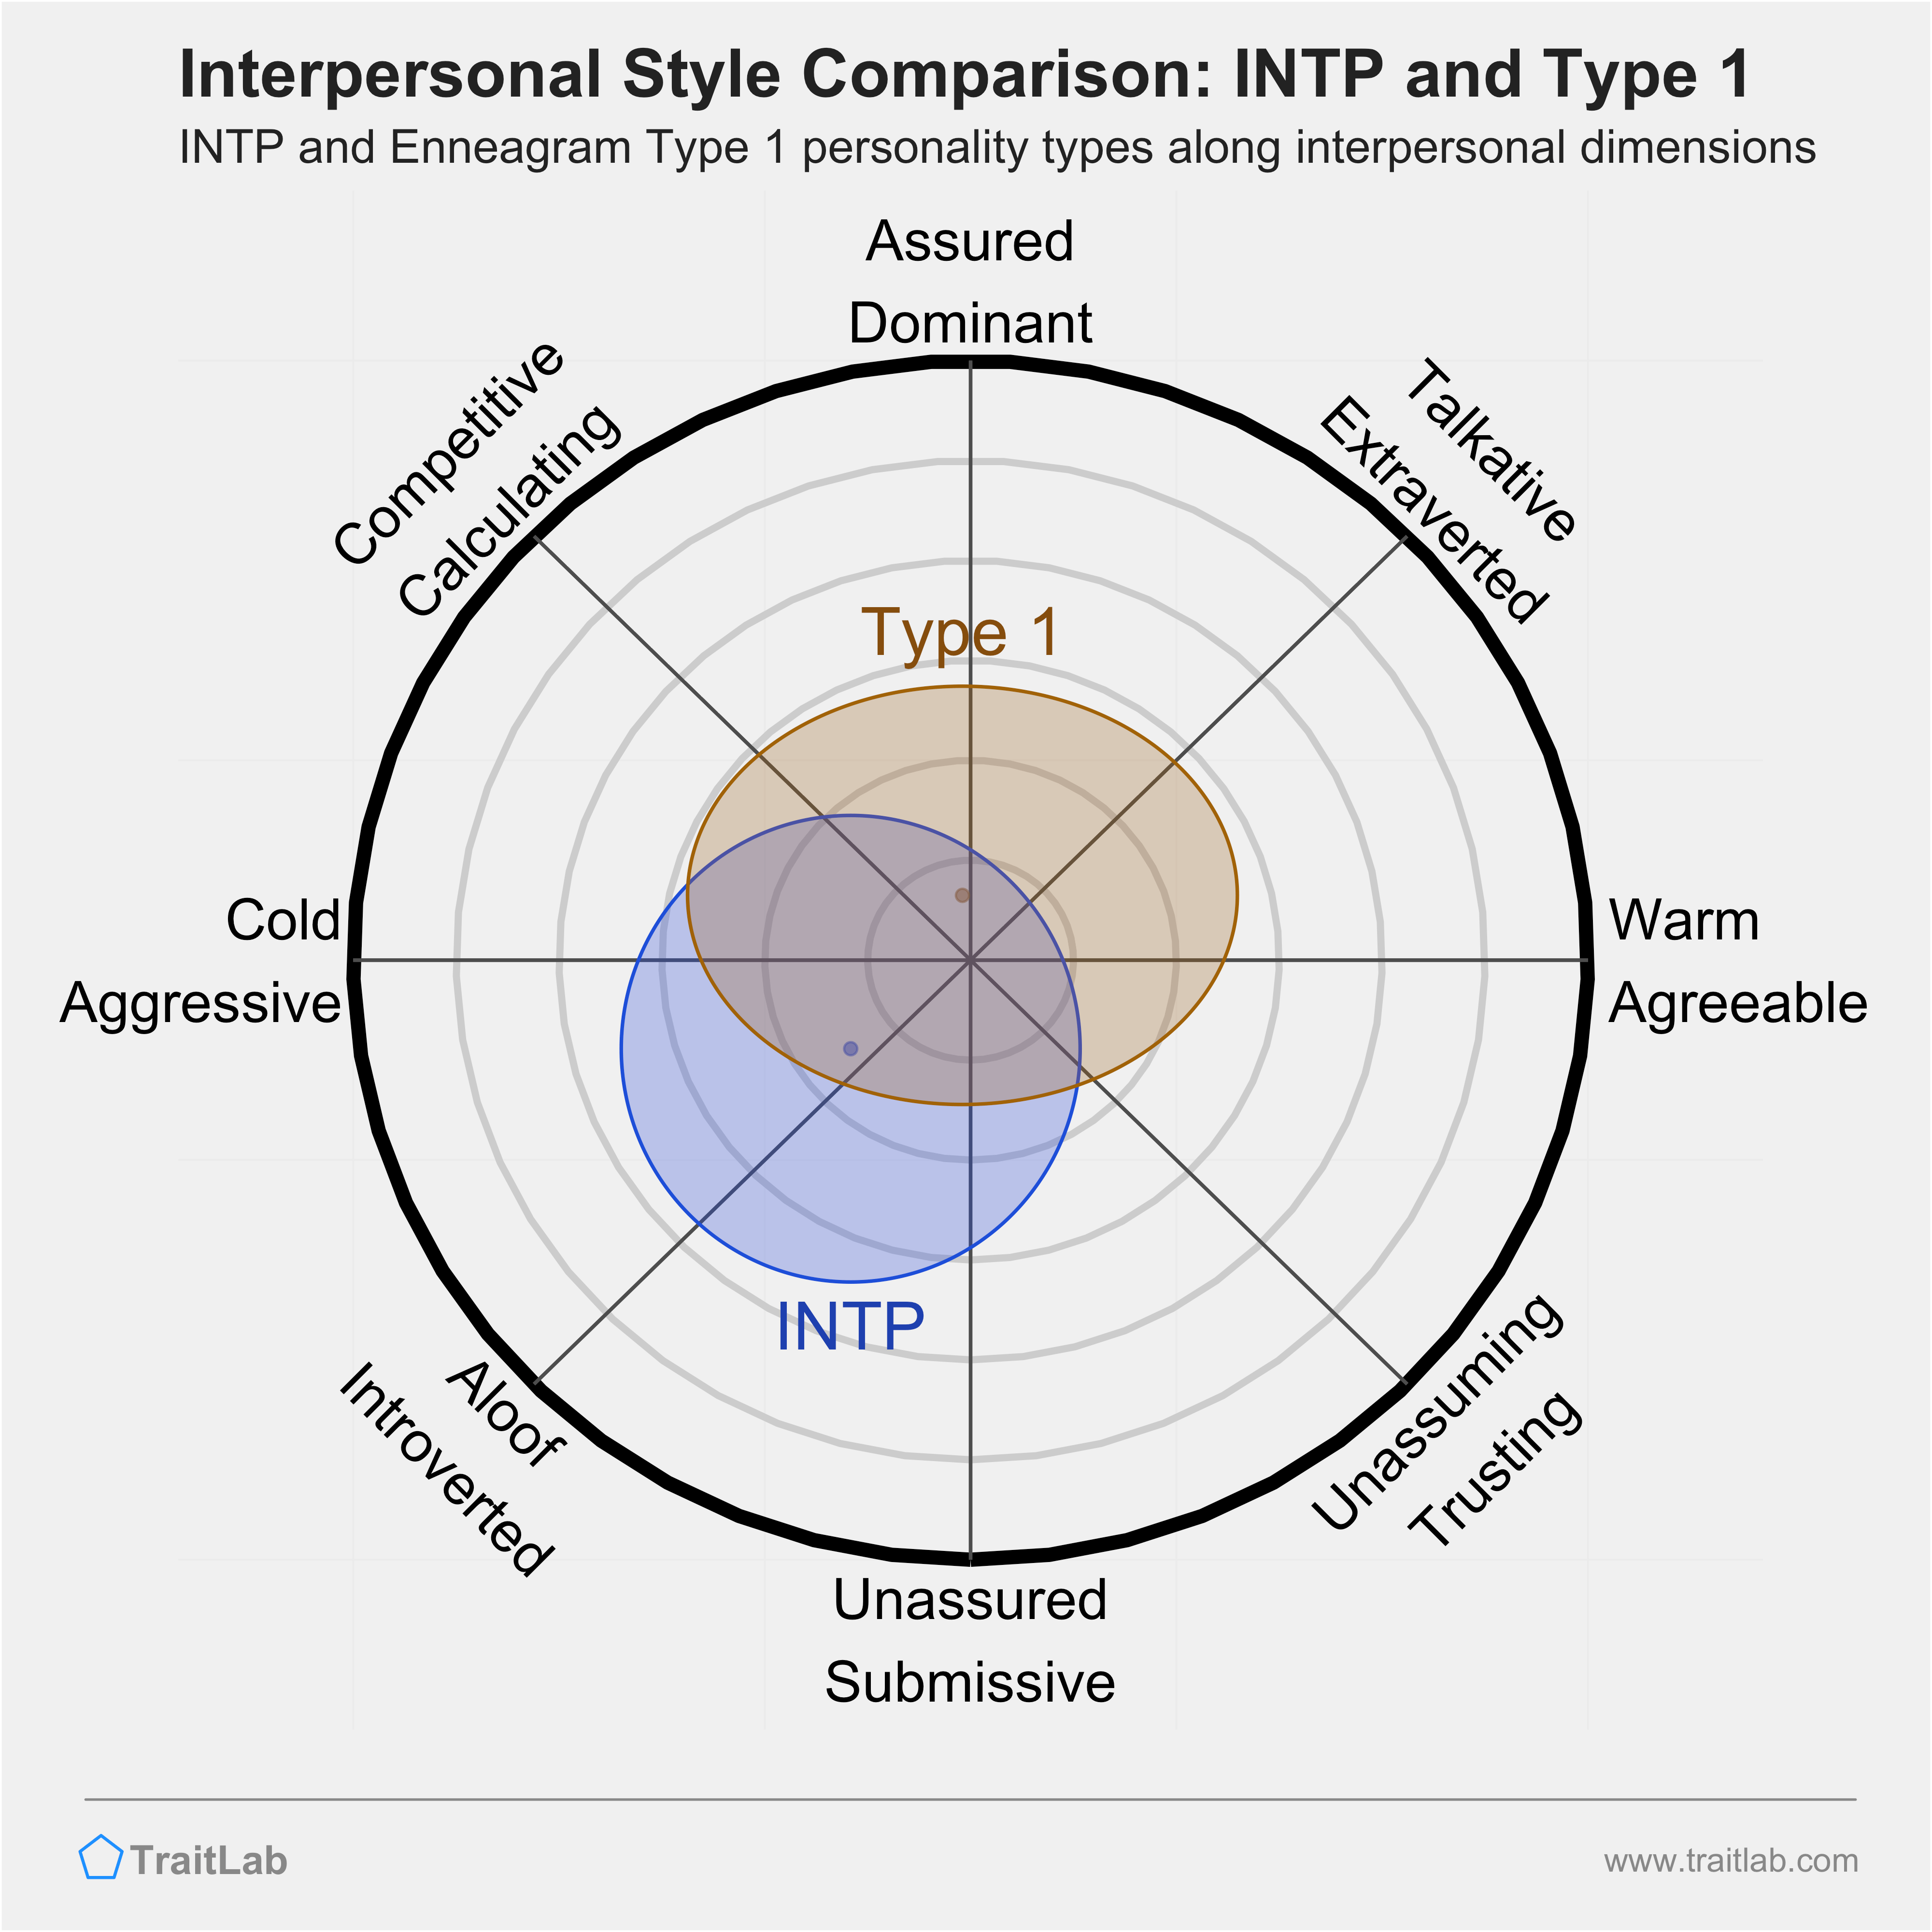 Enneagram INTP and Type 1 comparison across interpersonal dimensions